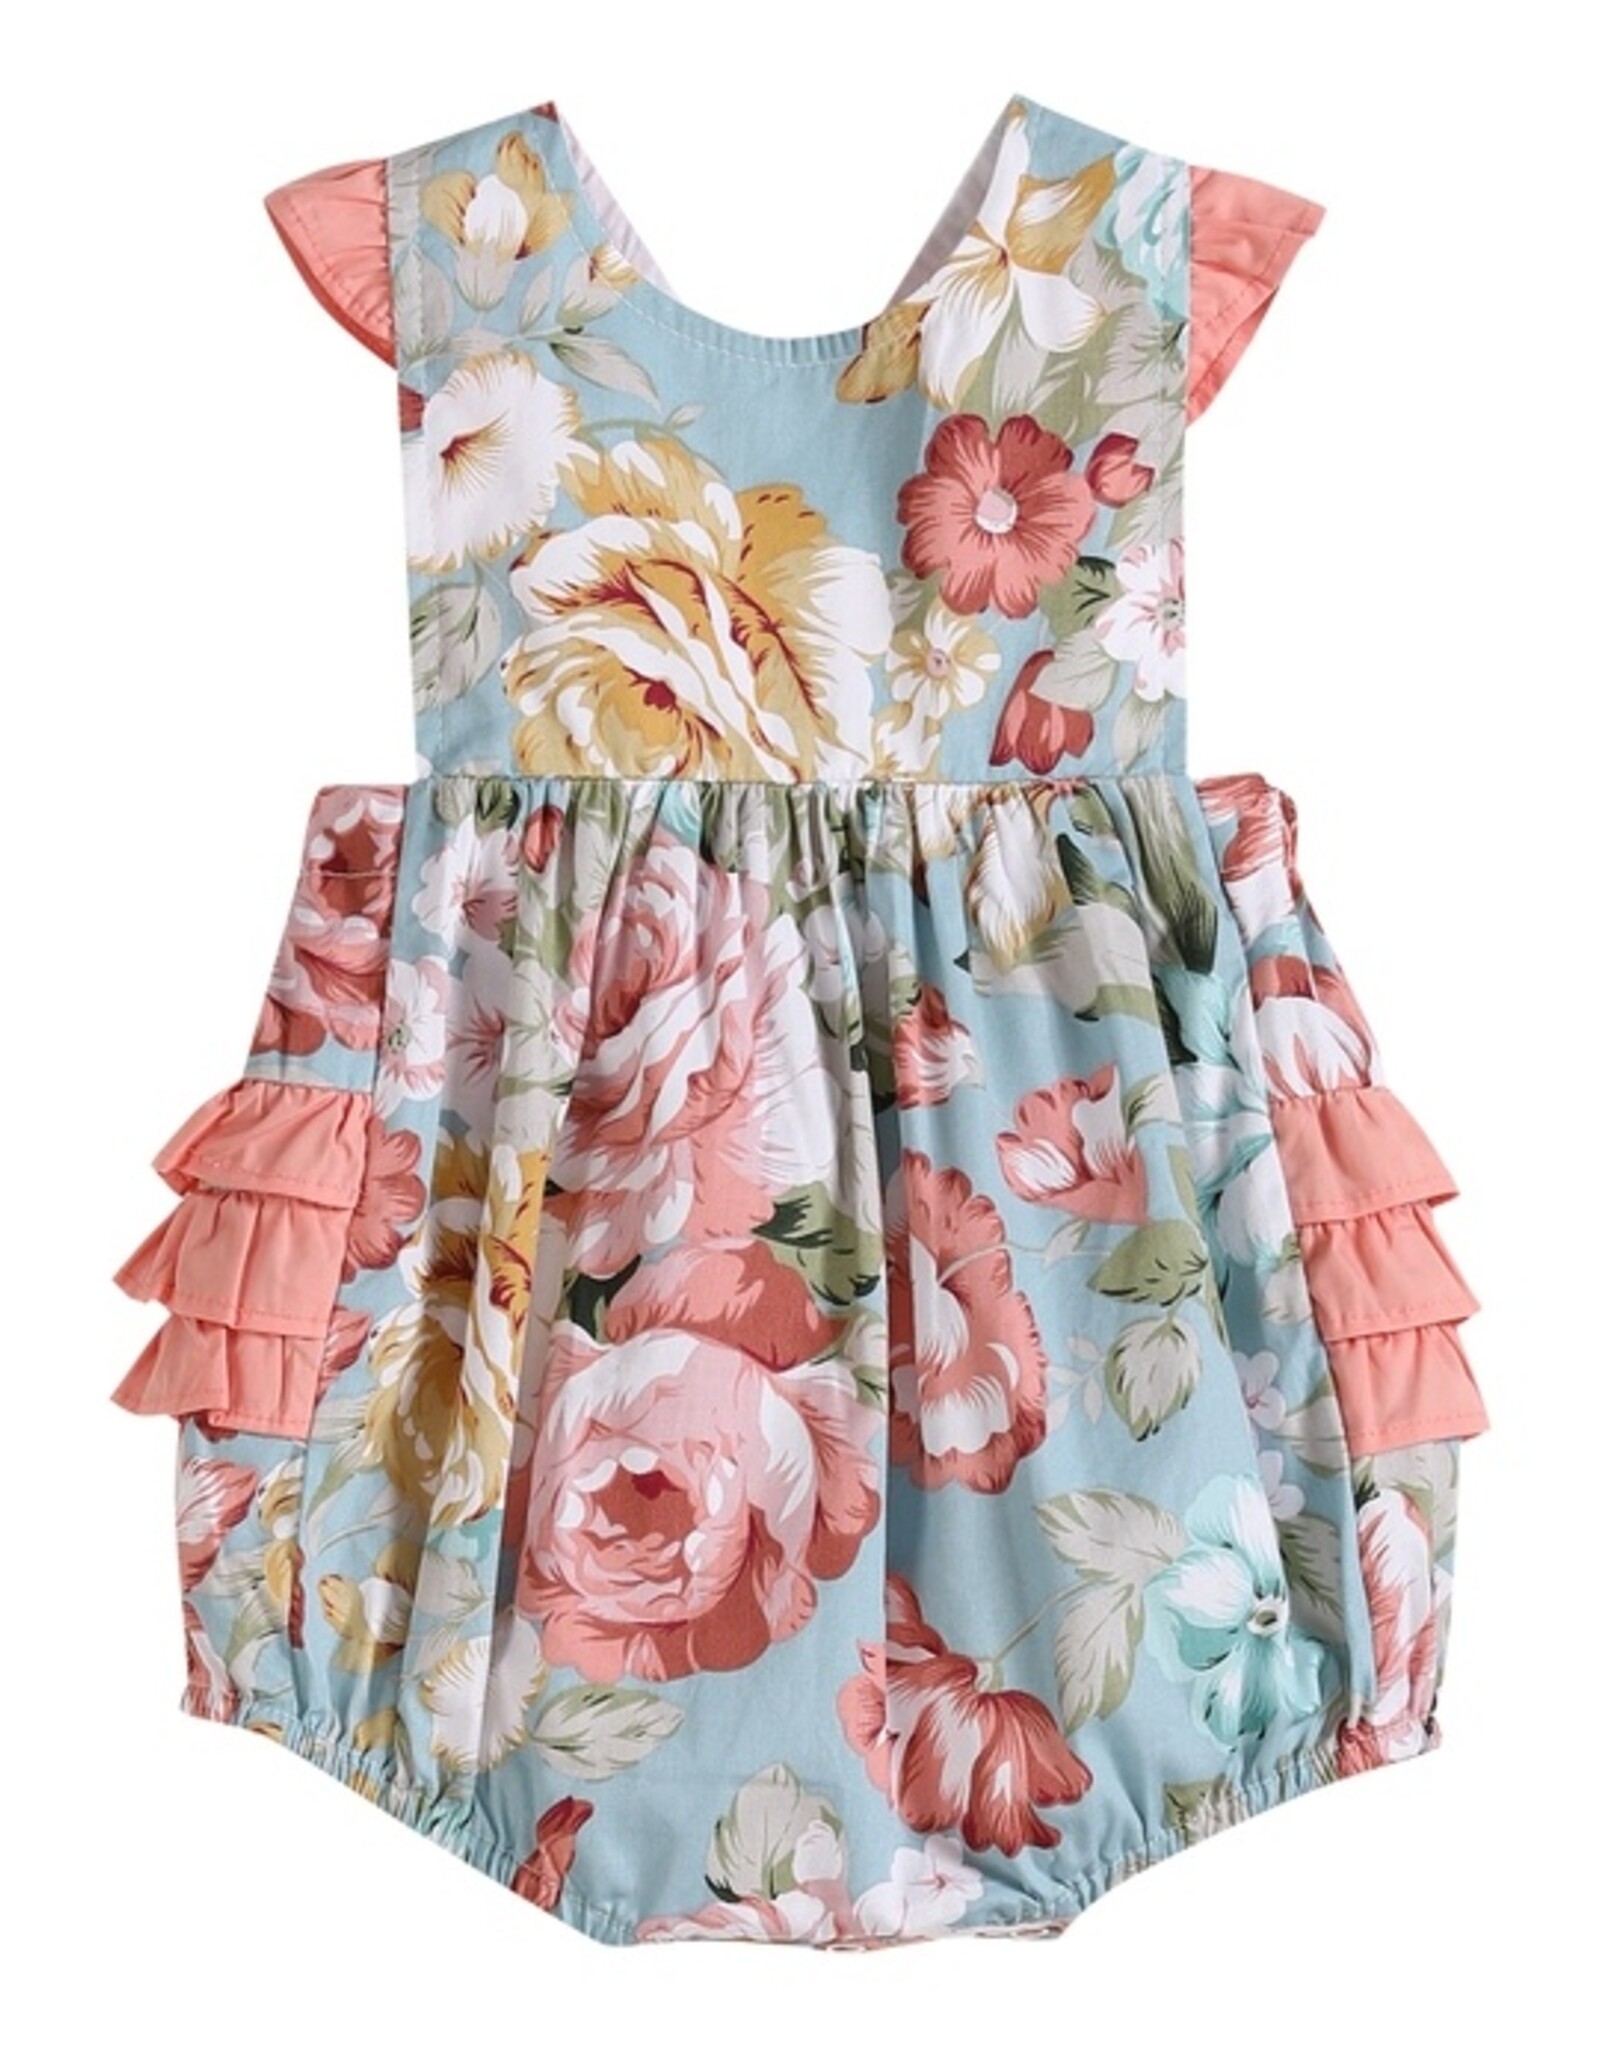 Floral Print Ruffle Baby Romper